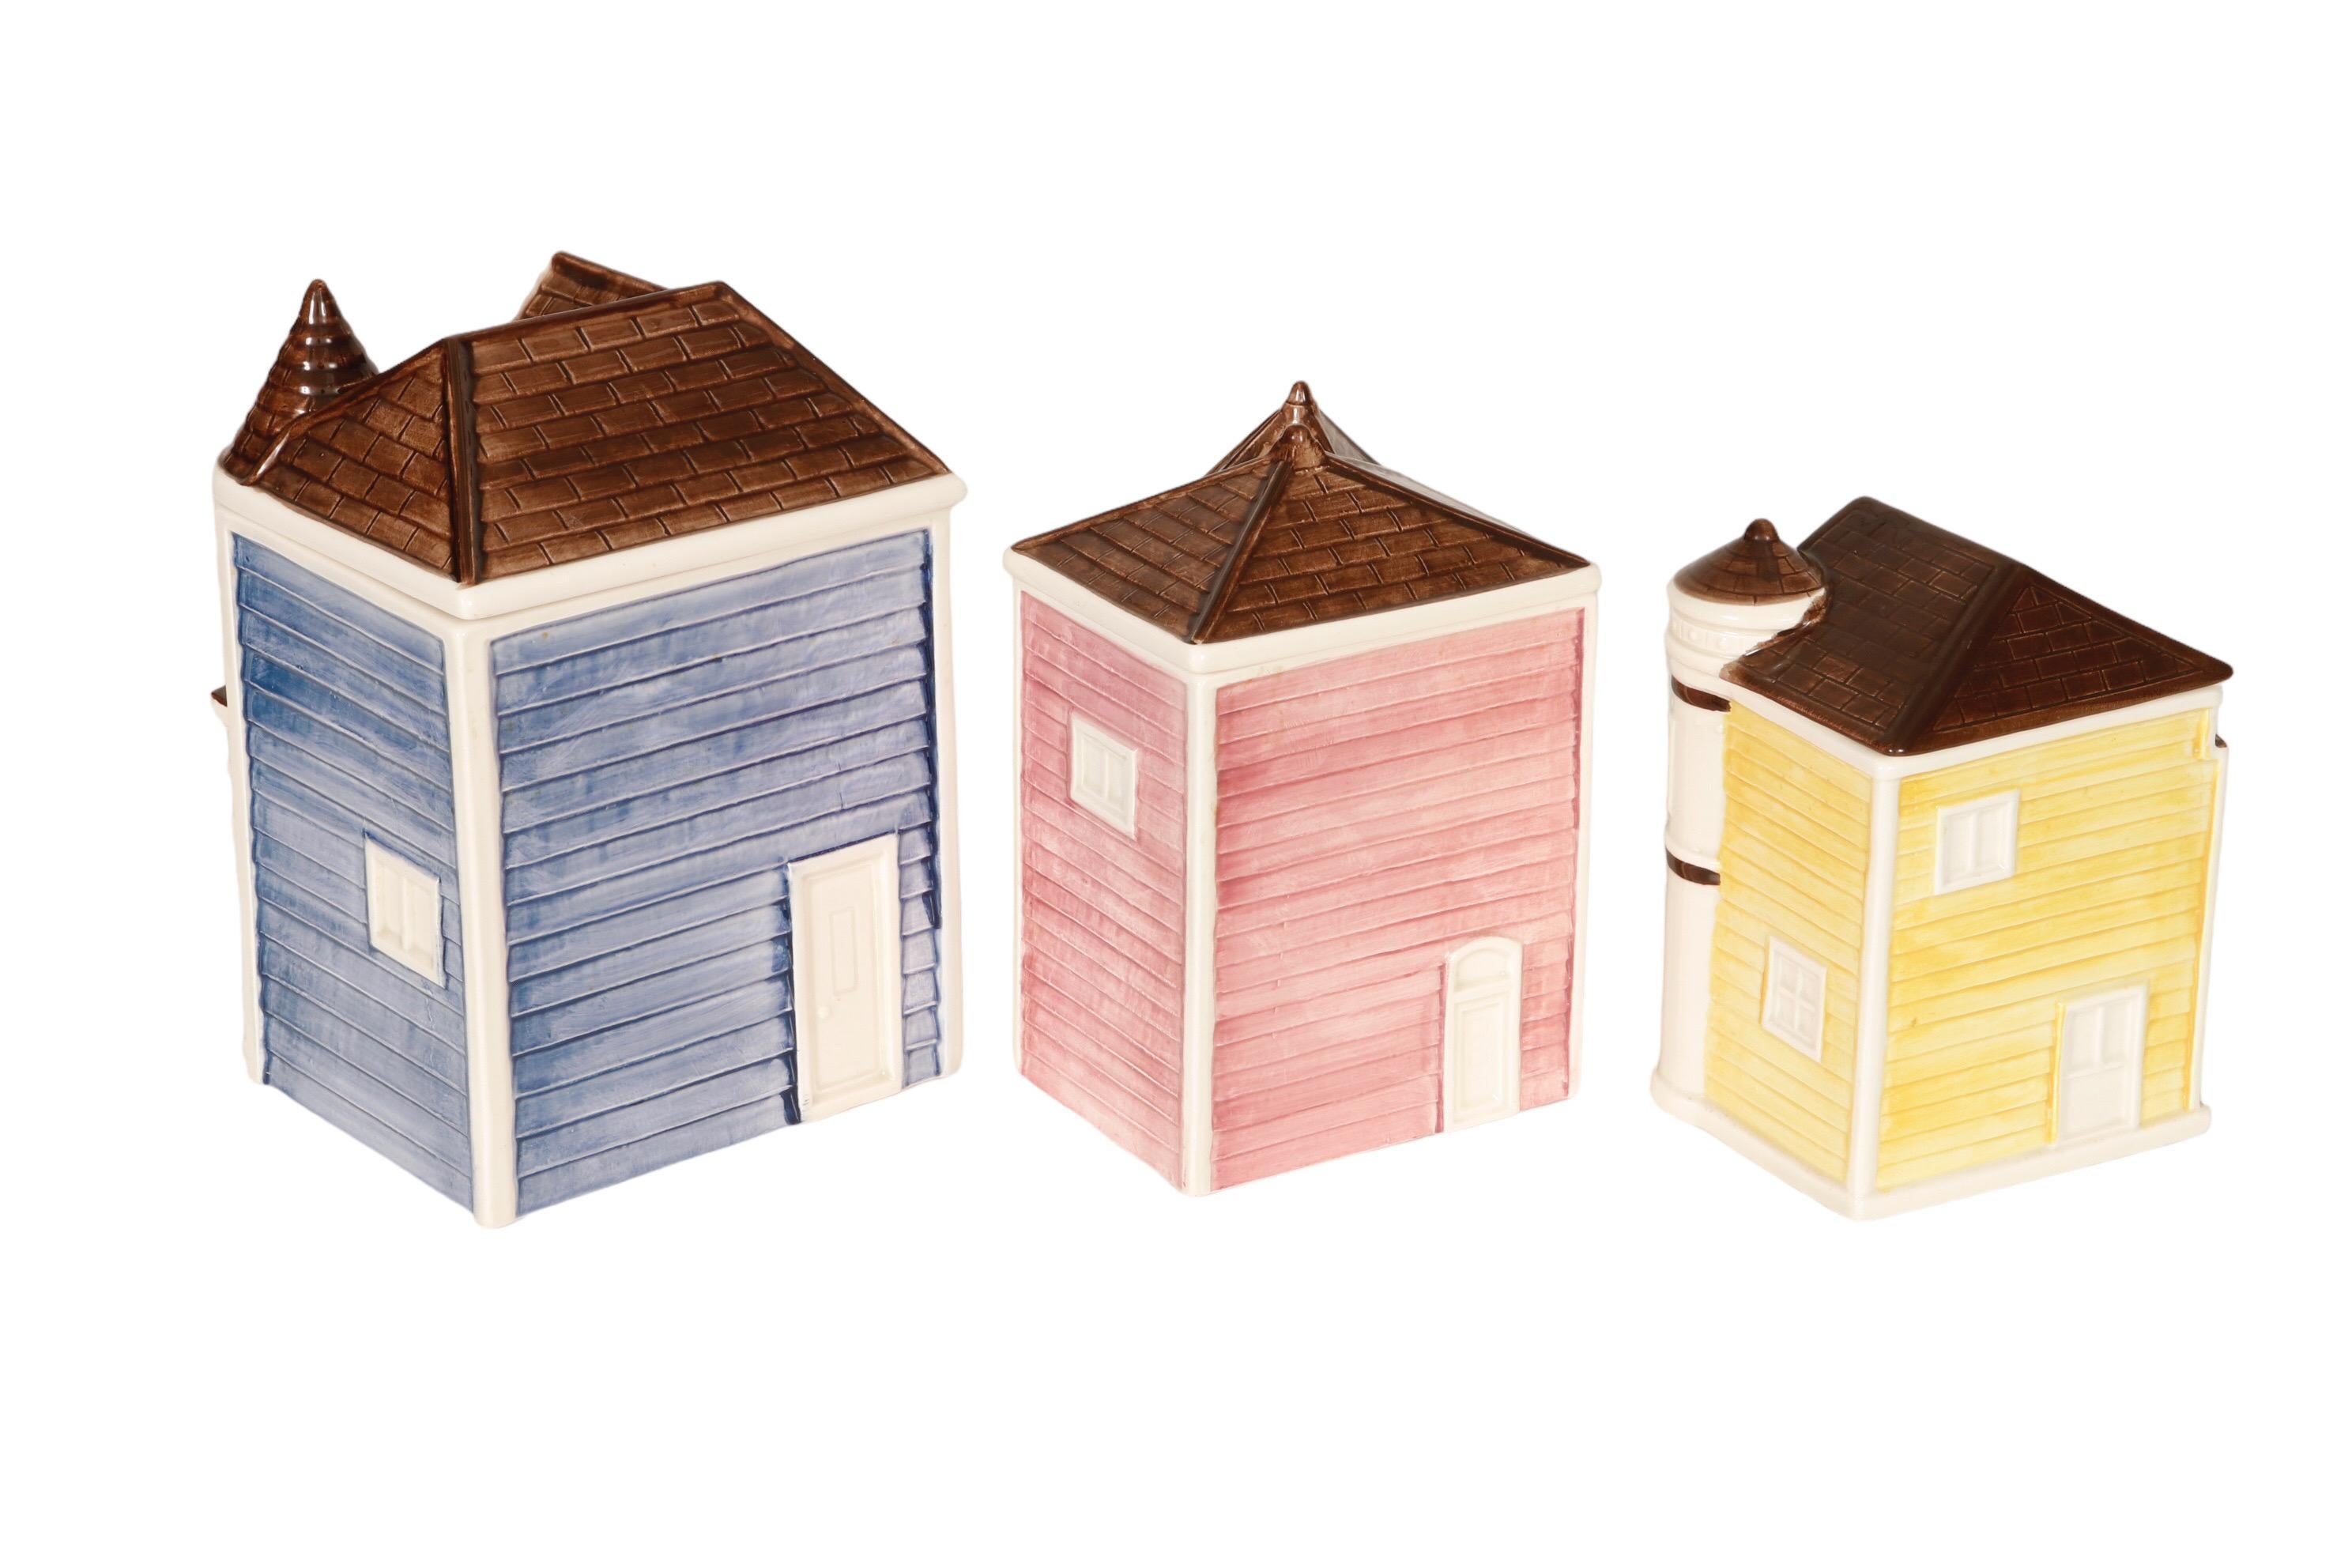 A set of three hand painted ceramic kitchen canisters in the style of Victorian “Painted Lady” houses, made by Otagiri of Japan. Brightly colored in powder blue, pink, and yellow. Marked ‘Otagiri Hand Painted made in Japan’ underneath. Canisters